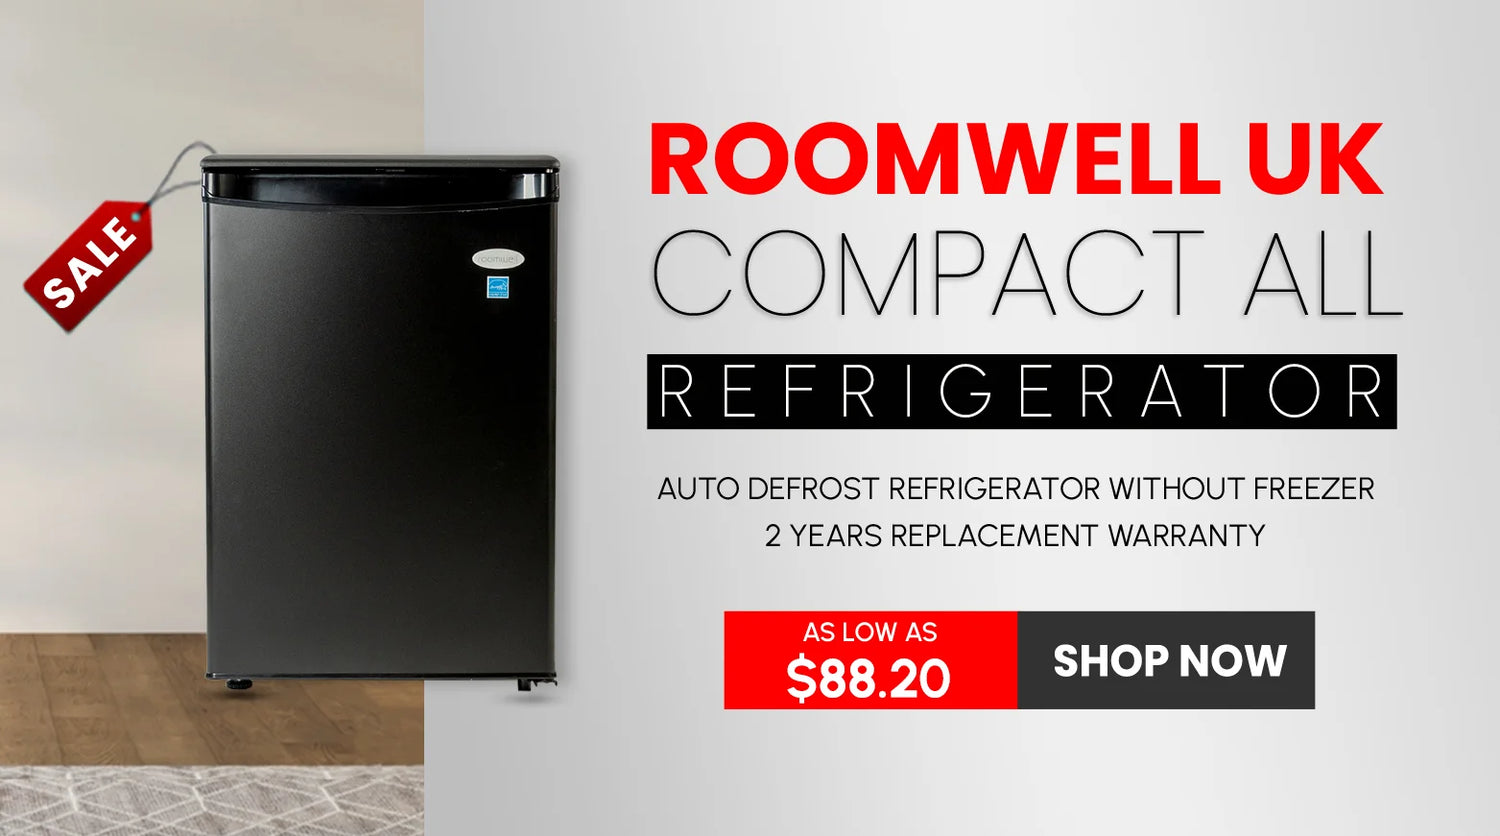 Compact Refrigerators - Roomwell UK - Shop Now